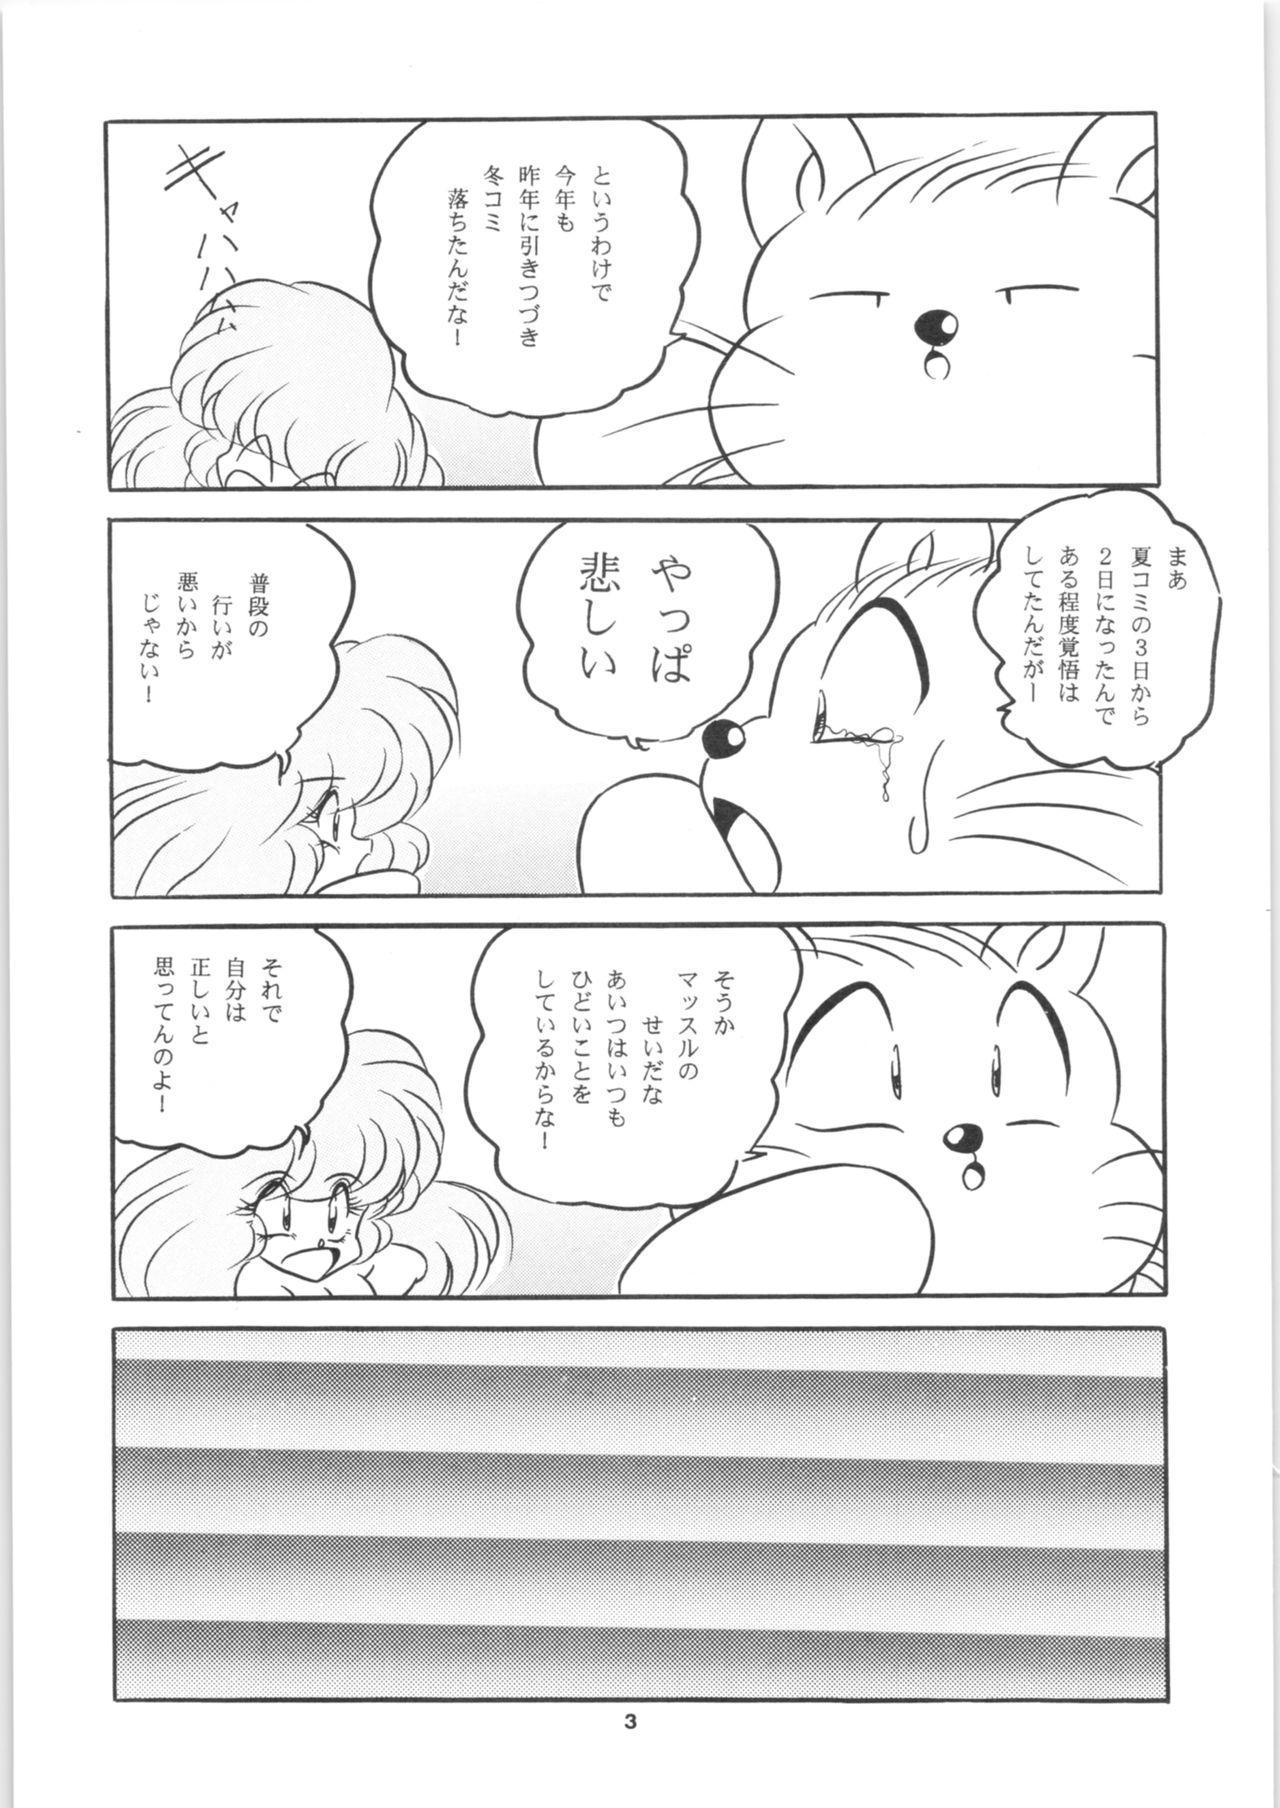 Public Sex C-COMPANY SPECIAL STAGE 17 - Ranma 12 Idol project Japan - Page 5